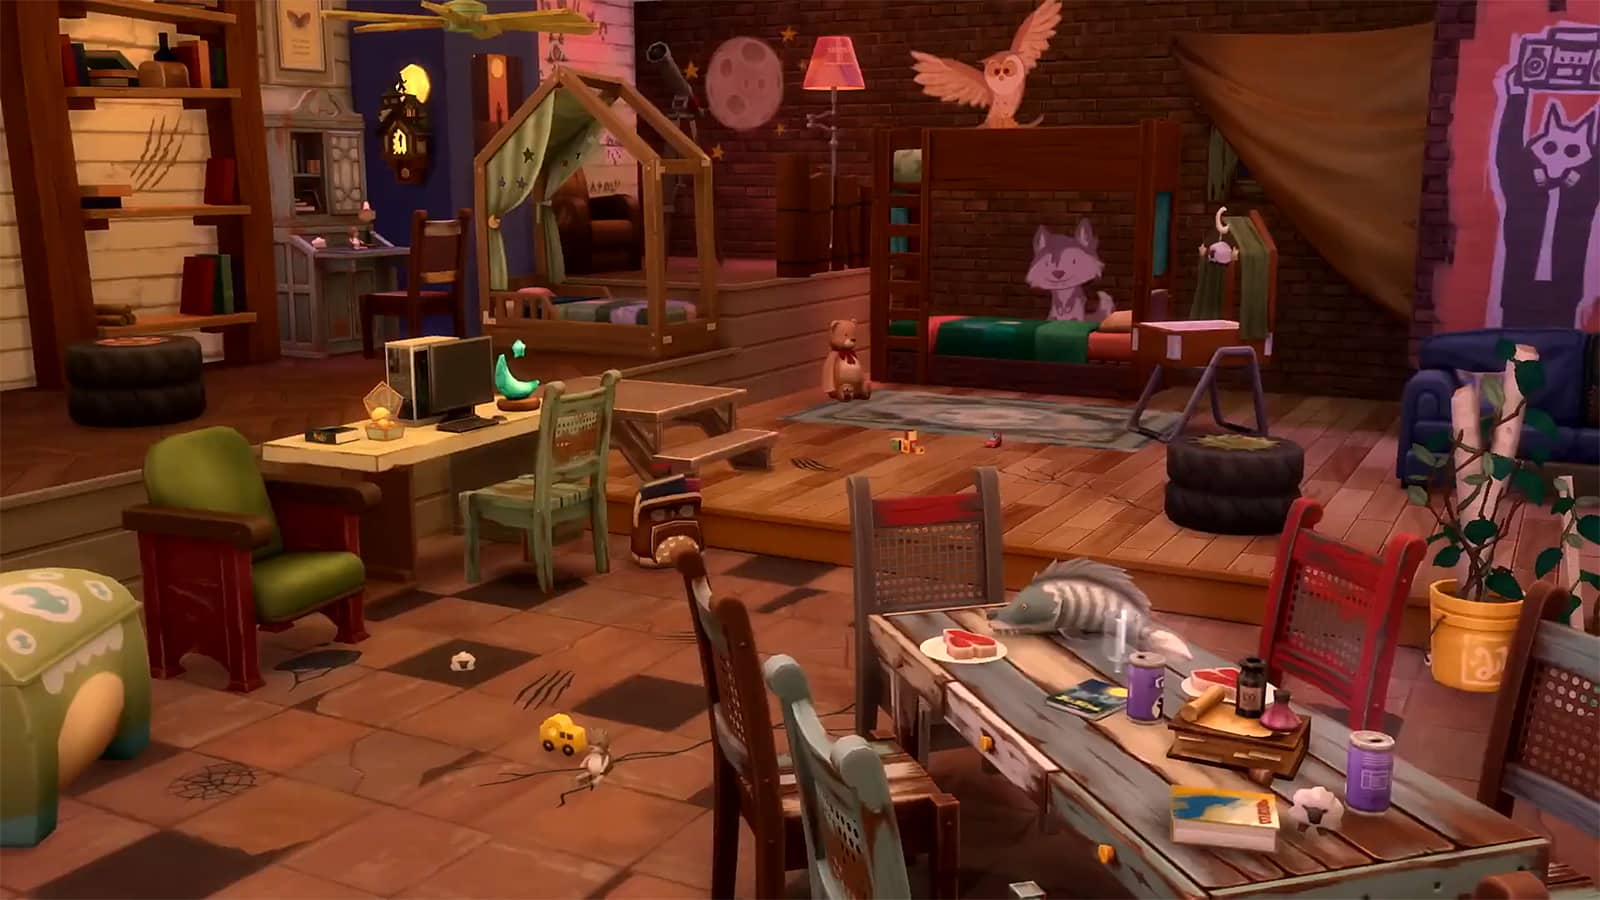 An interior in The Sims 4, showing off items in the new Werewolves Game Pack